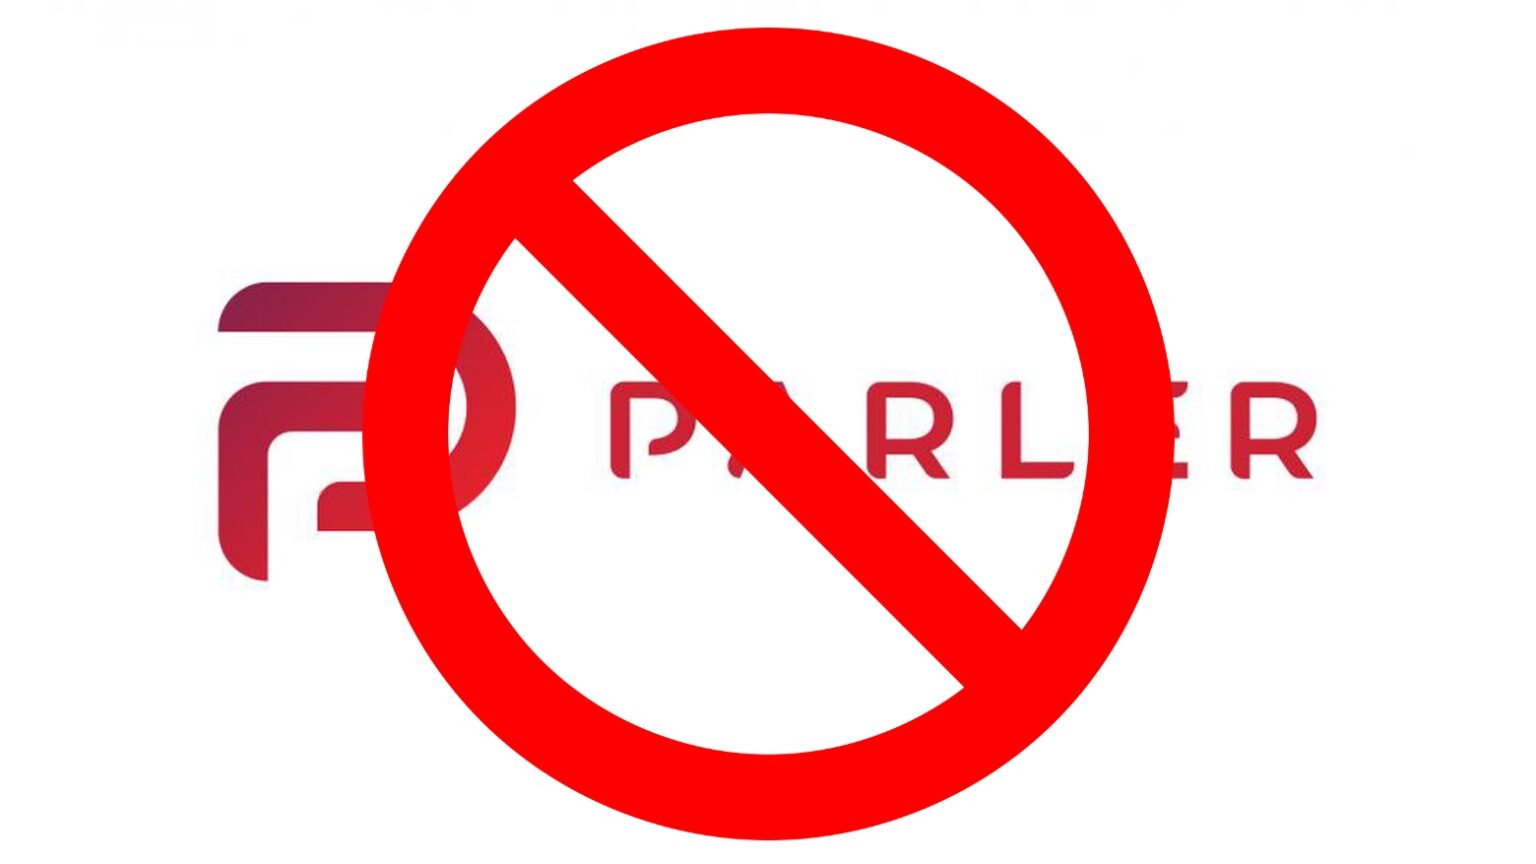 Google, Apple and Amazon exercise their rights as private companies to refuse to do business with Parler.